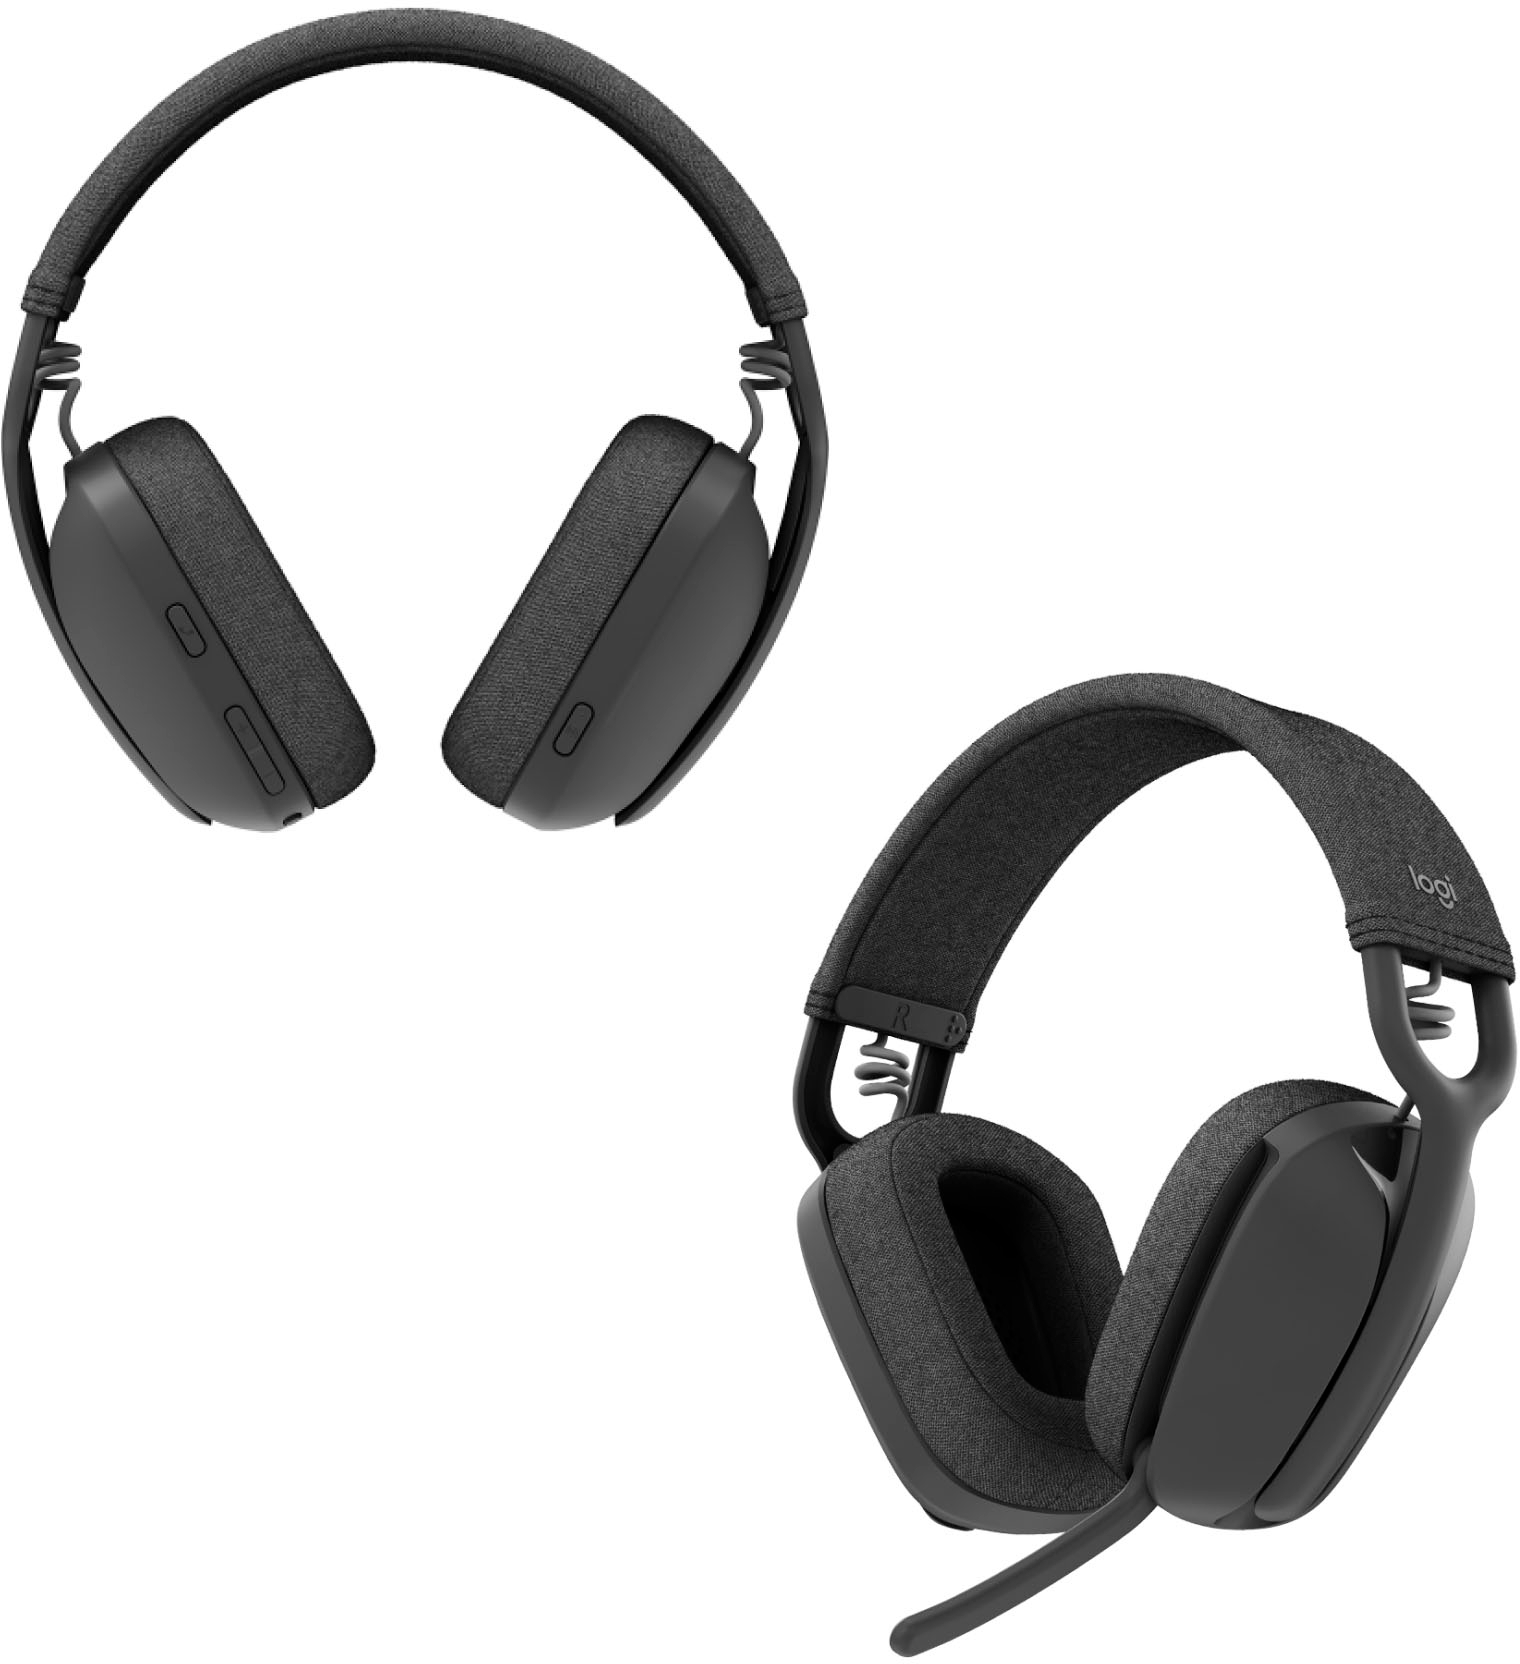 981-001256 Ear Zone Logitech Graphite with 100 Best Buy Microphone Headphones Vibe Over - Noise-Cancelling Bluetooth